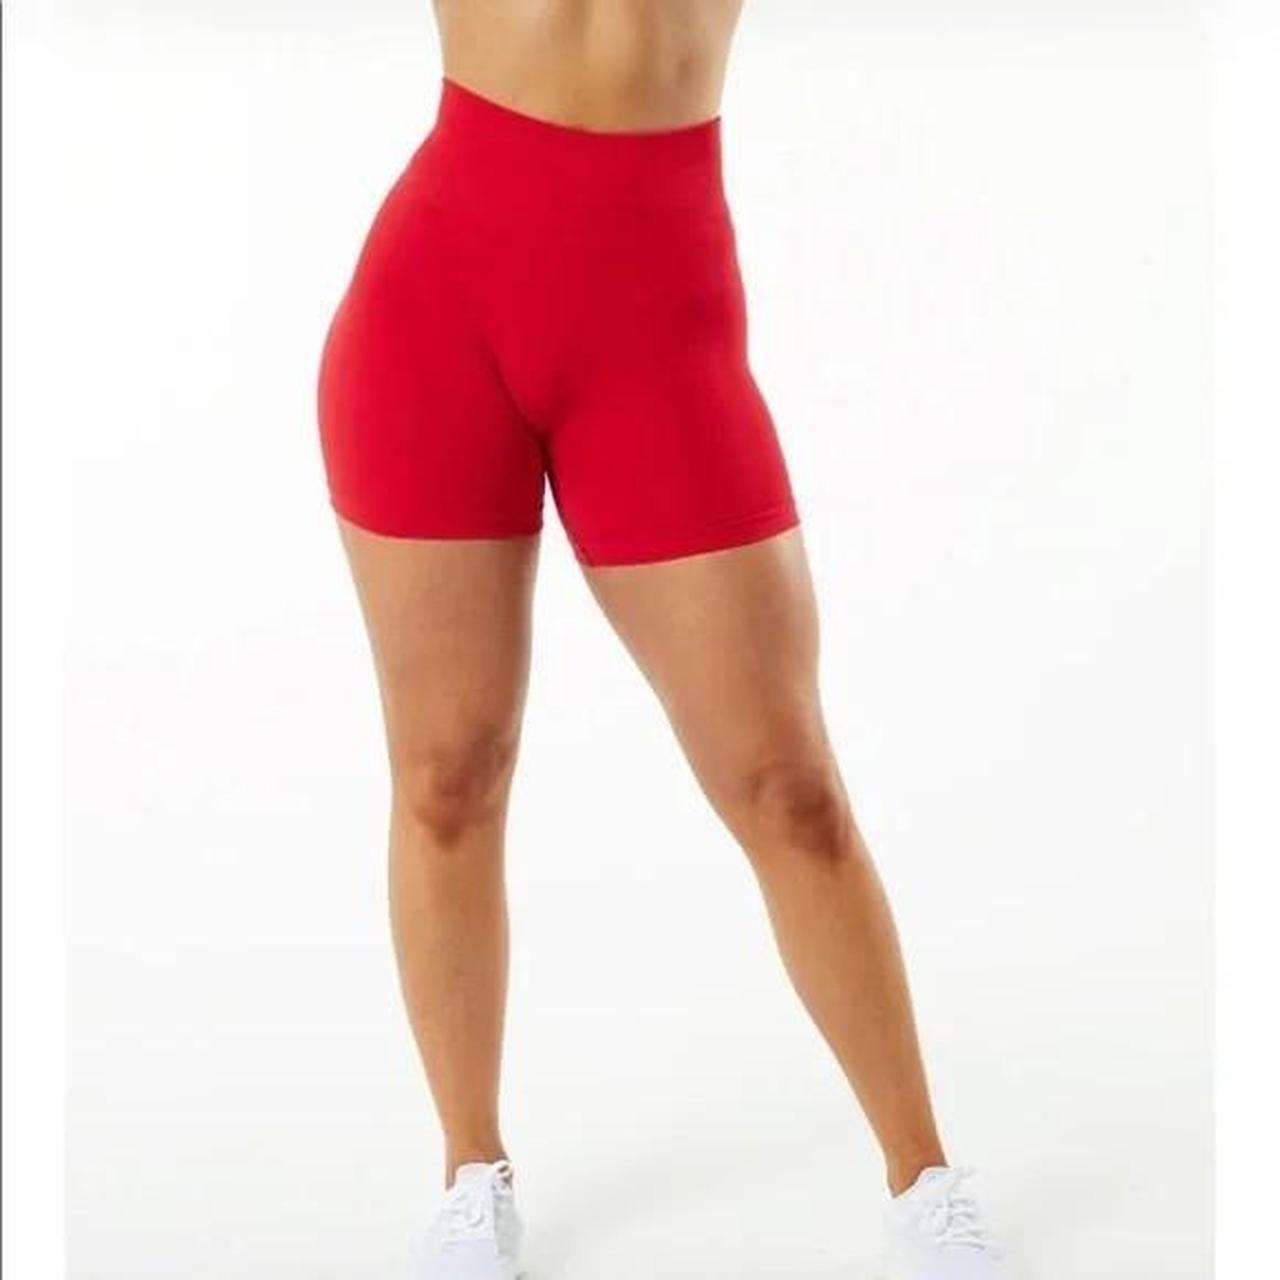 Alphalete Amplify 4.5” Shorts in Formula Red, Women's Fashion, Activewear  on Carousell